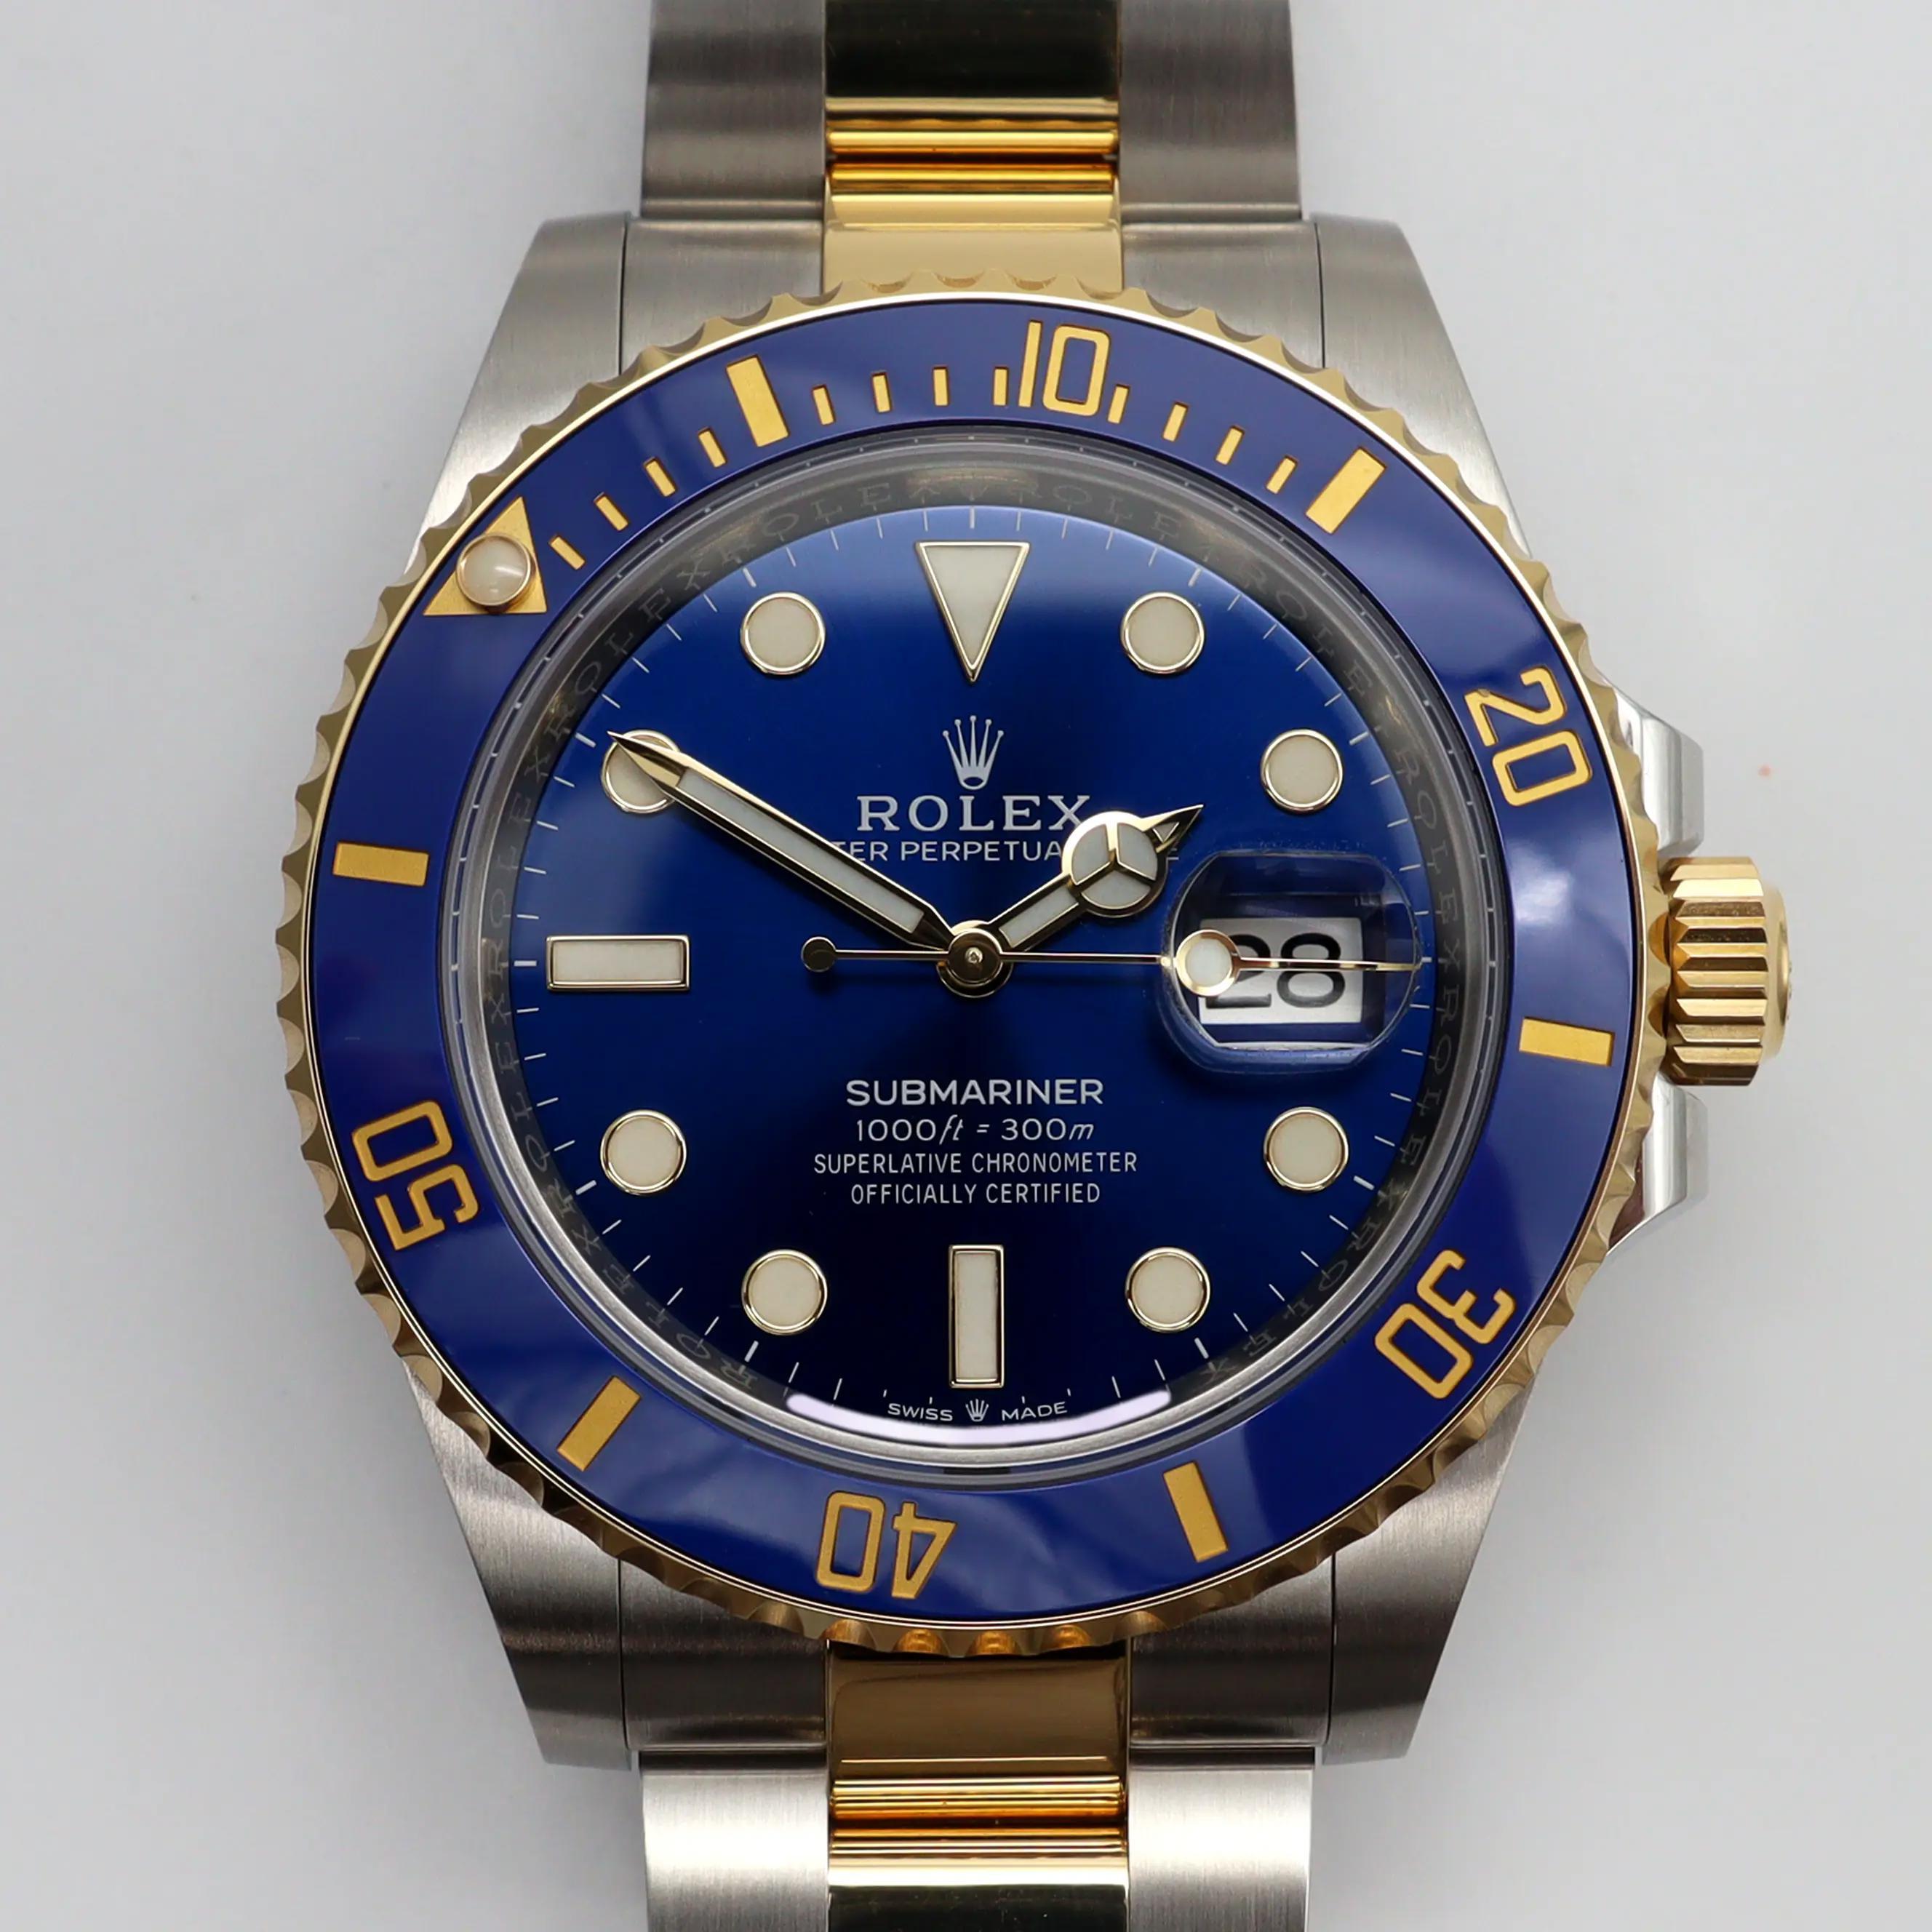 Rolex Submariner Steel 18K Yellow Gold Blue Dial Automatic Watch 126613LB For Sale 2